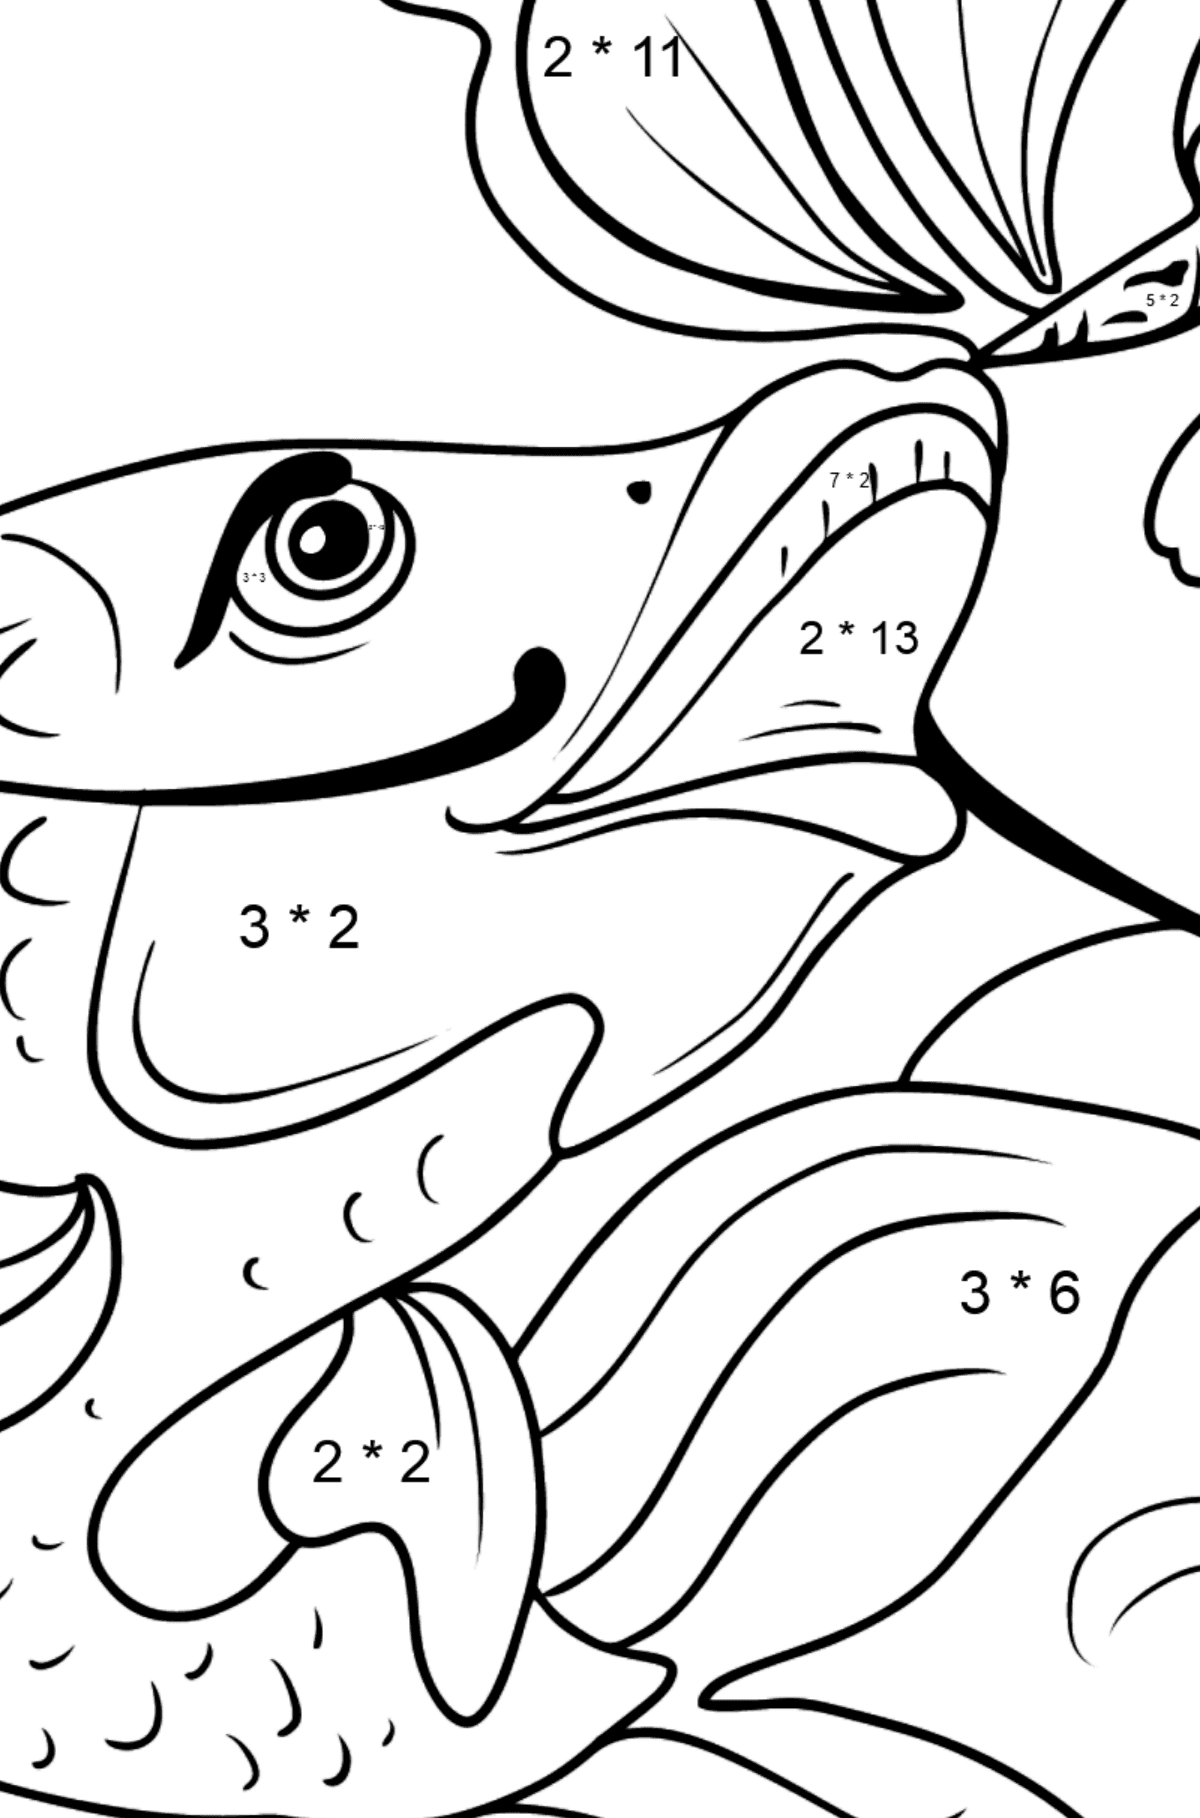 Fish and Butterfly coloring page - Math Coloring - Multiplication for Kids